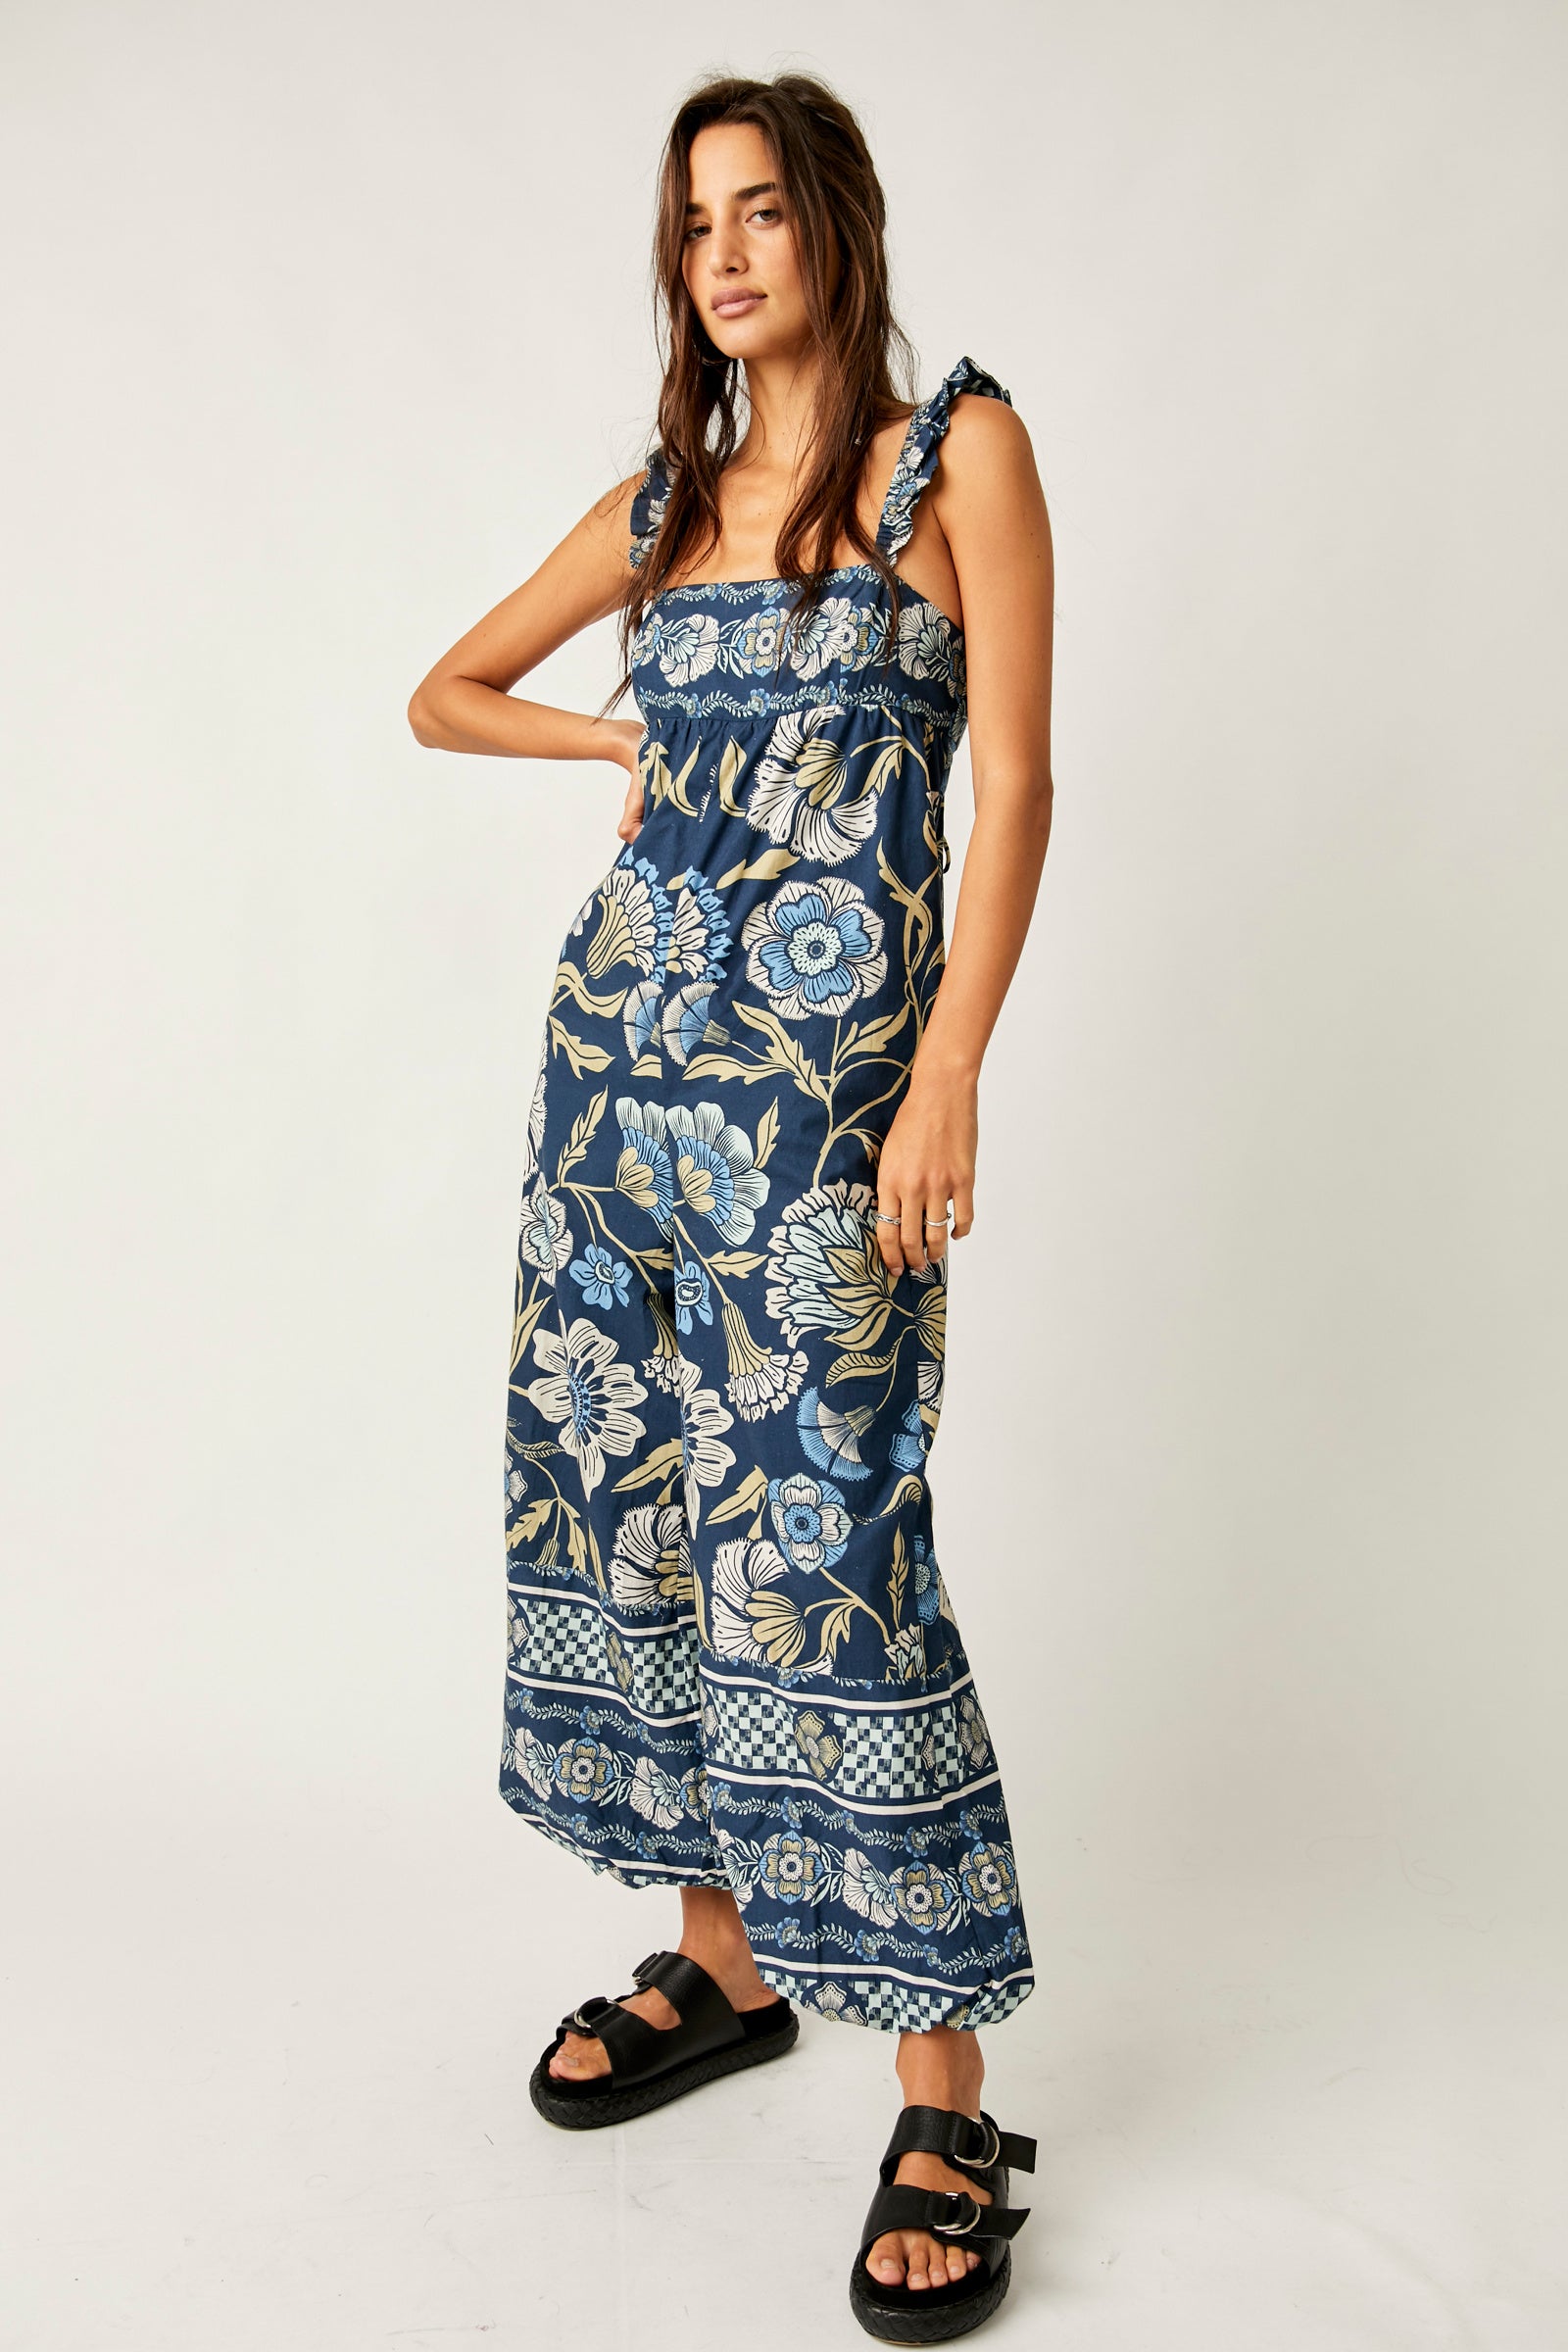 FREE PEOPLE BALI ALBRIGHT JUMPSUIT IN NAVY